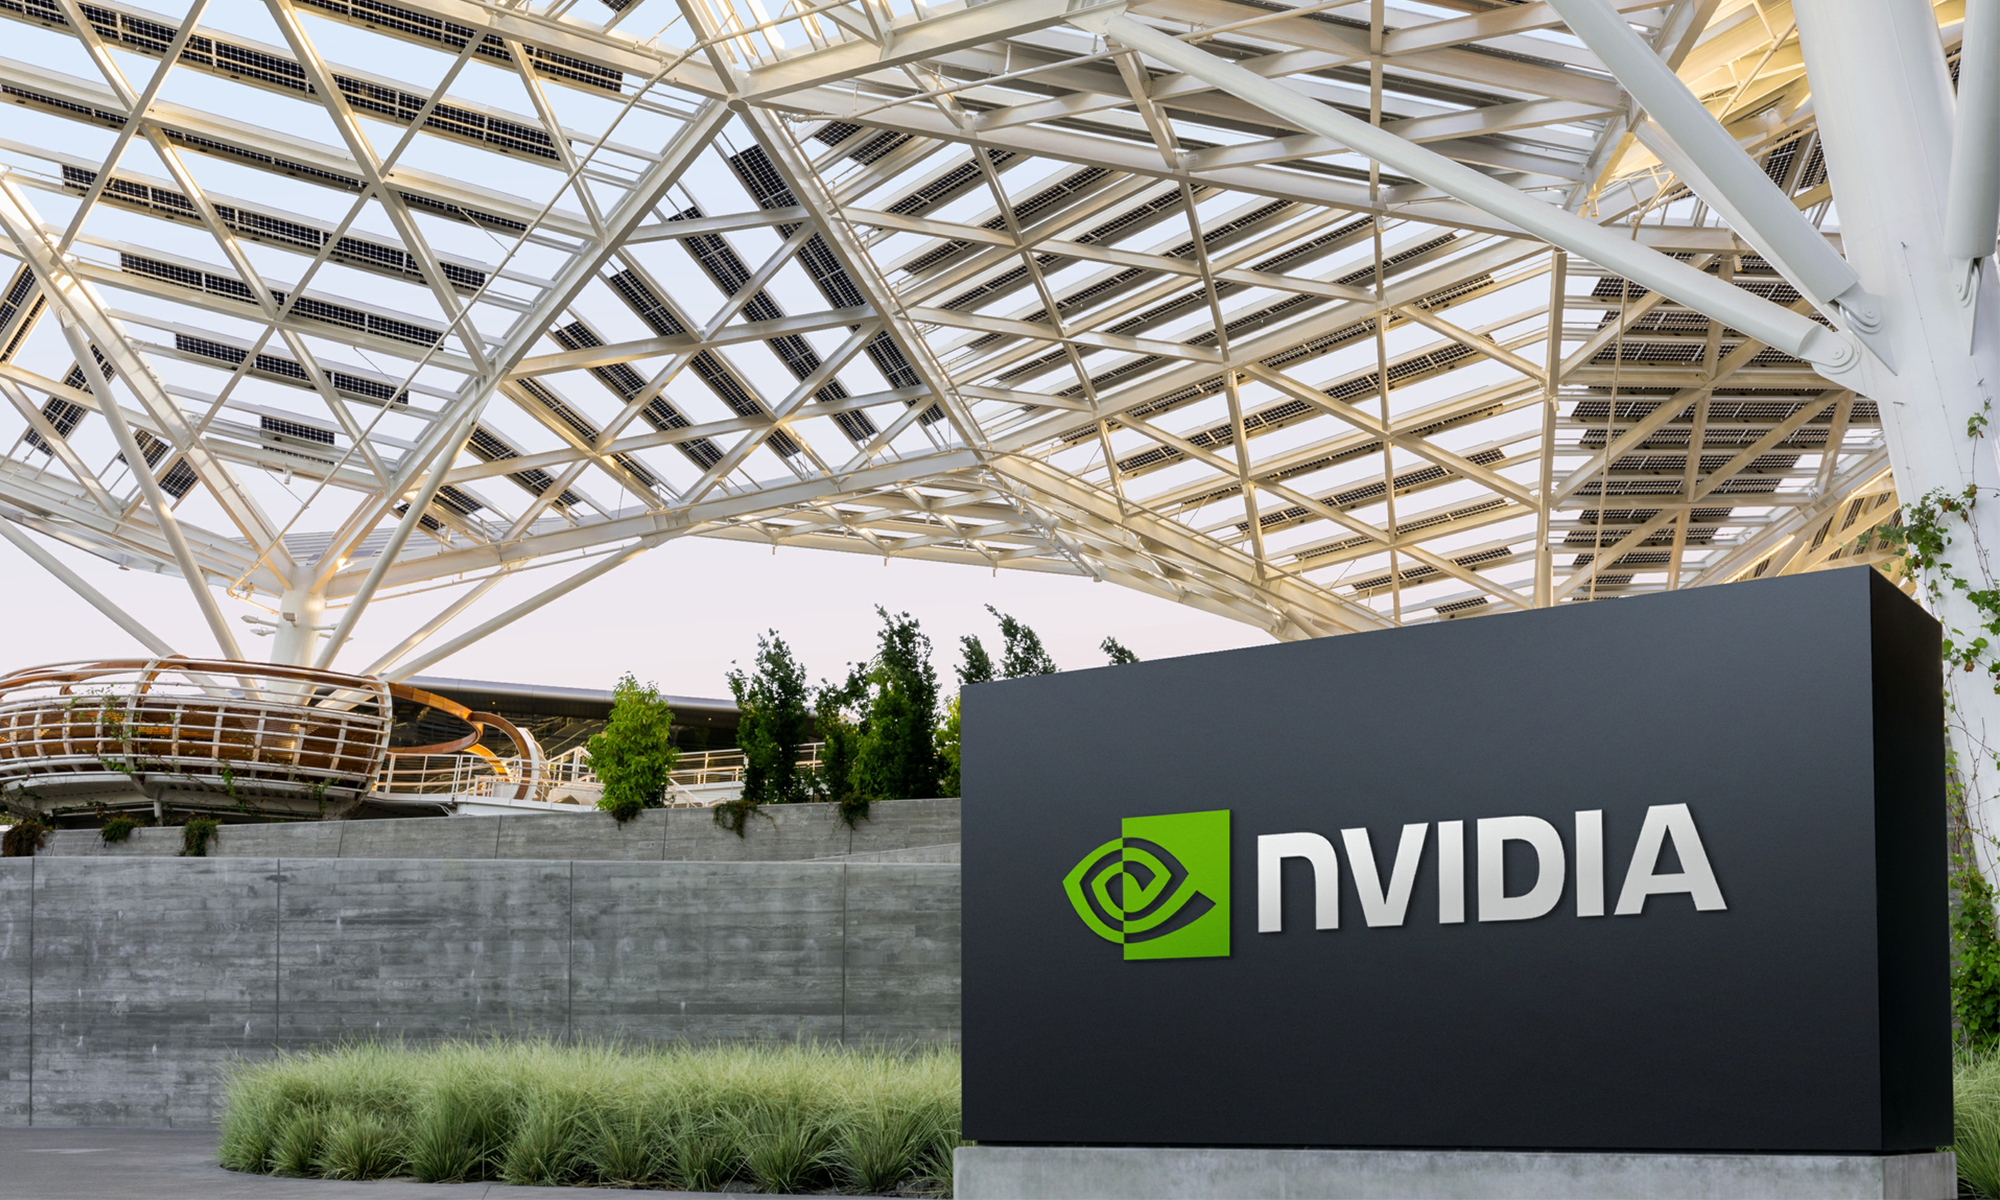 Is Nvidia Stock Going to $1,400? 1 Wall Street Analyst Thinks So.